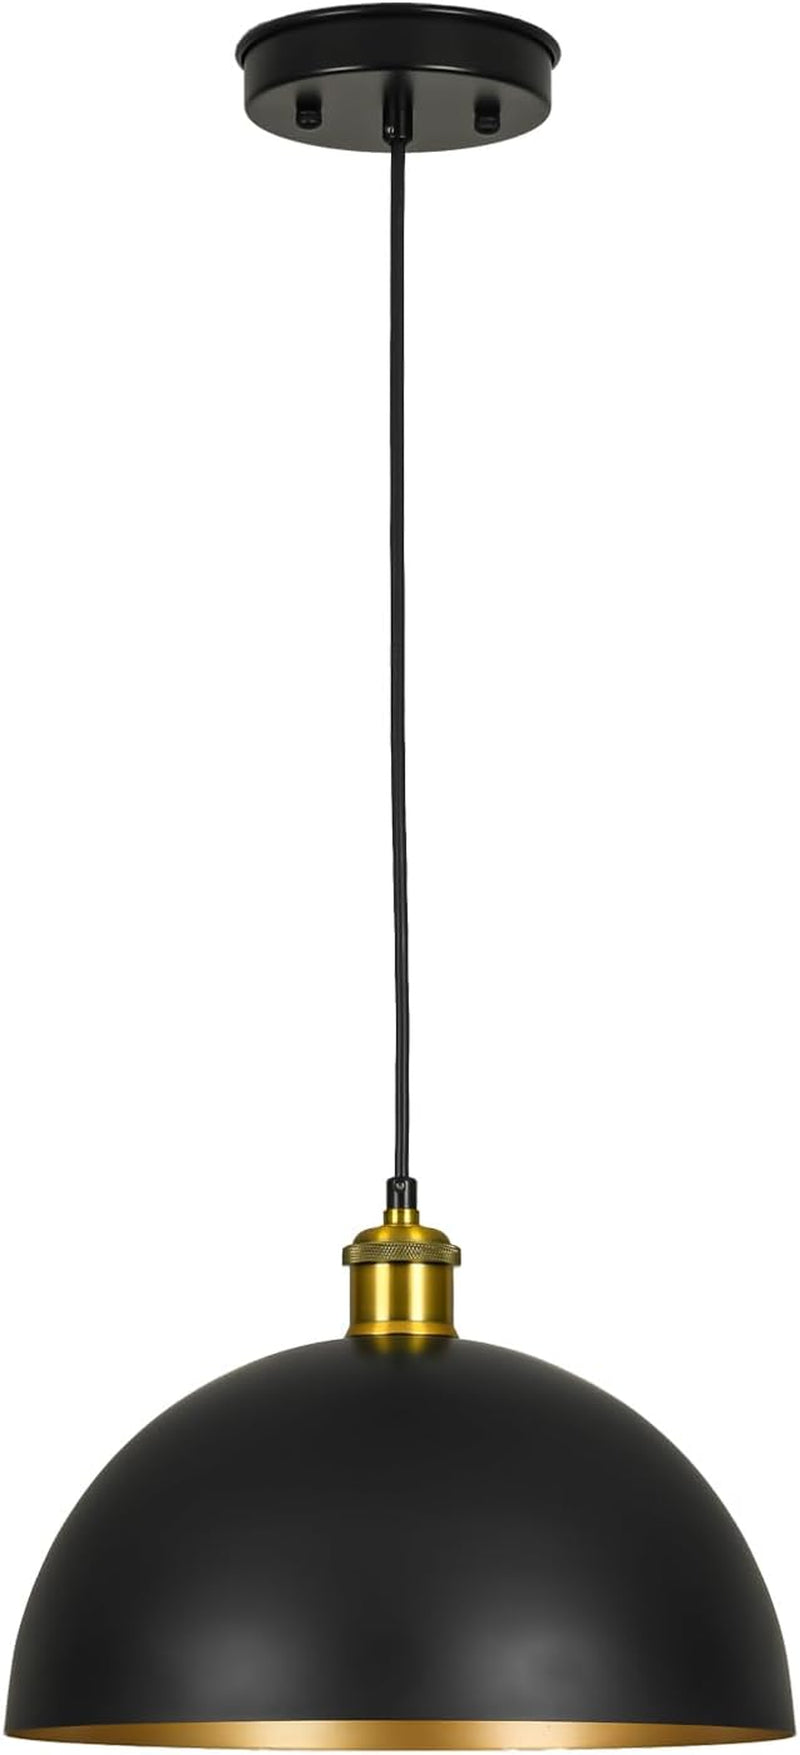 Chandelier Ceiling Light Fixture 11.8 Inch Pendant Lights Kitchen Island Hanging Lamp Ceiling Lighting Modern Black and Gold Farmhouse Vintage Lamp Shade Industrial Lantern Dome Light